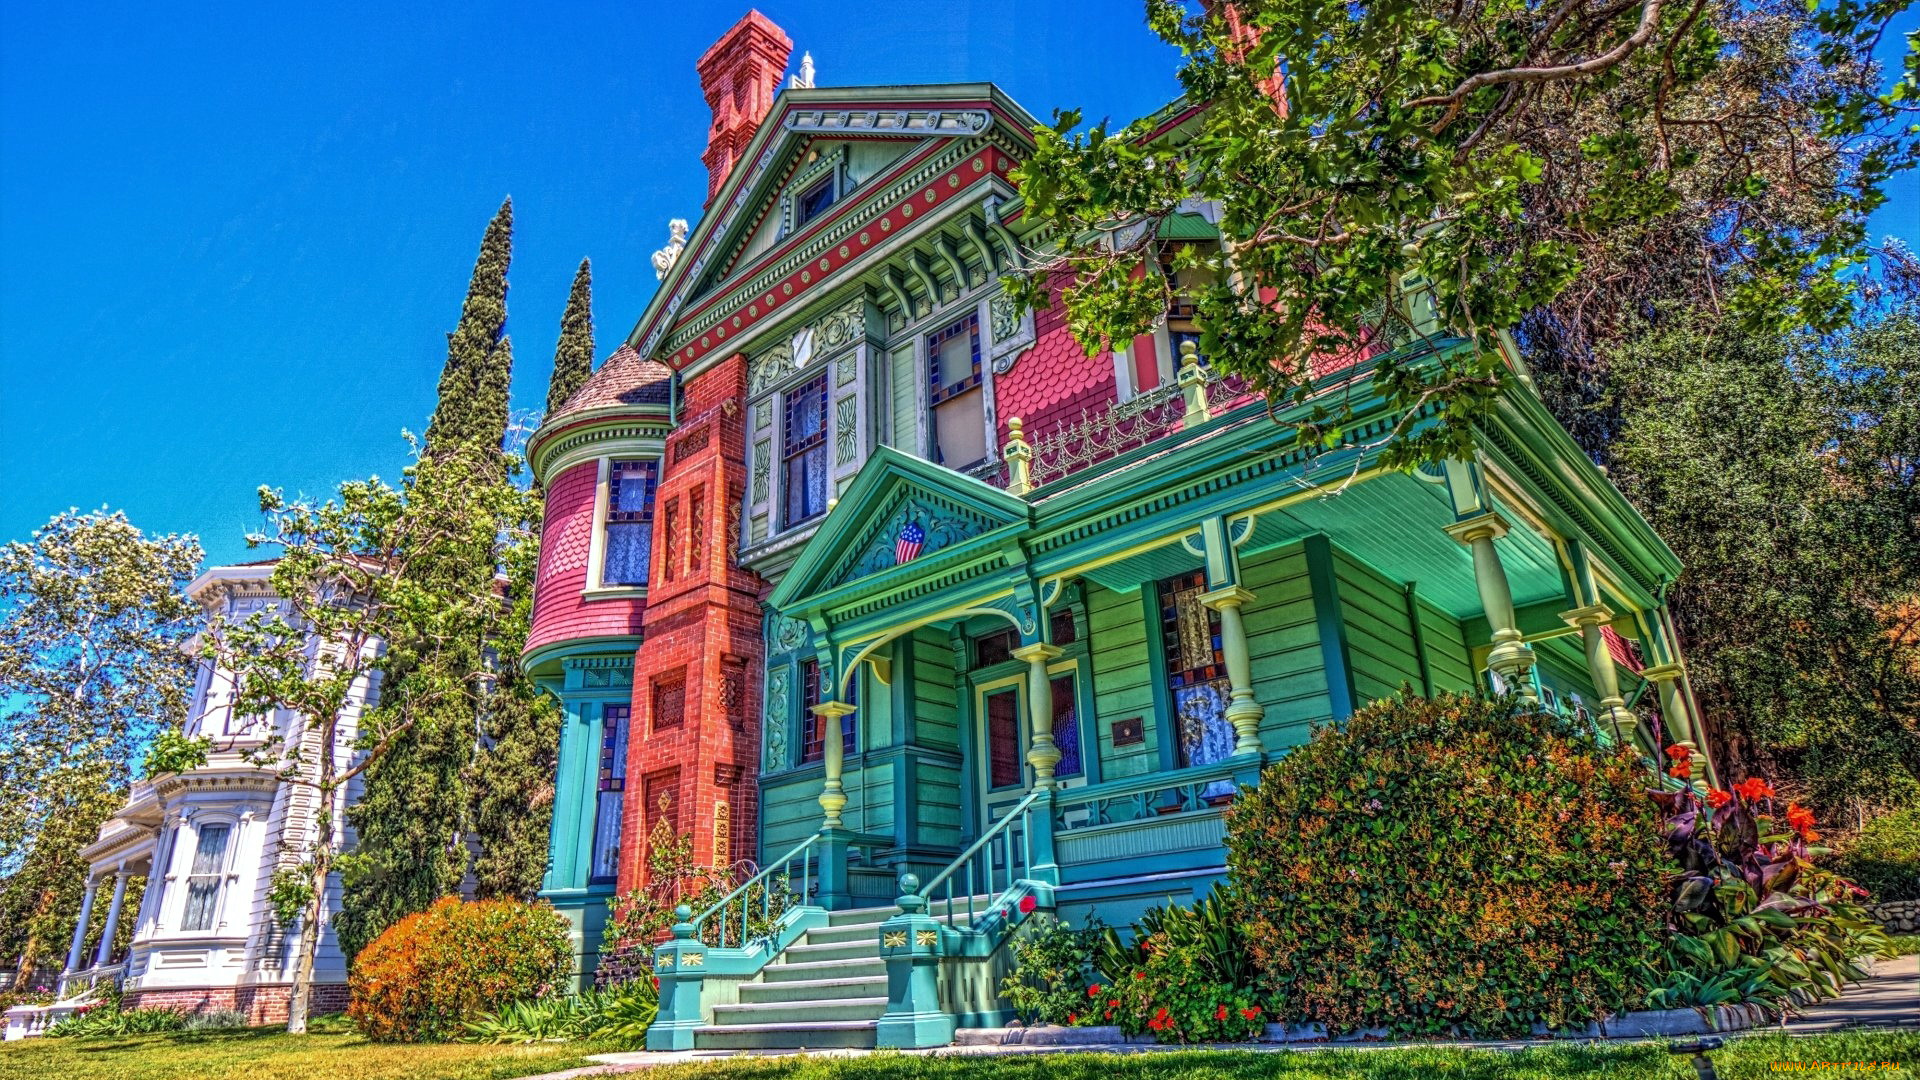 vintage, house, in, california, города, -, здания, , дома, vintage, house, in, california